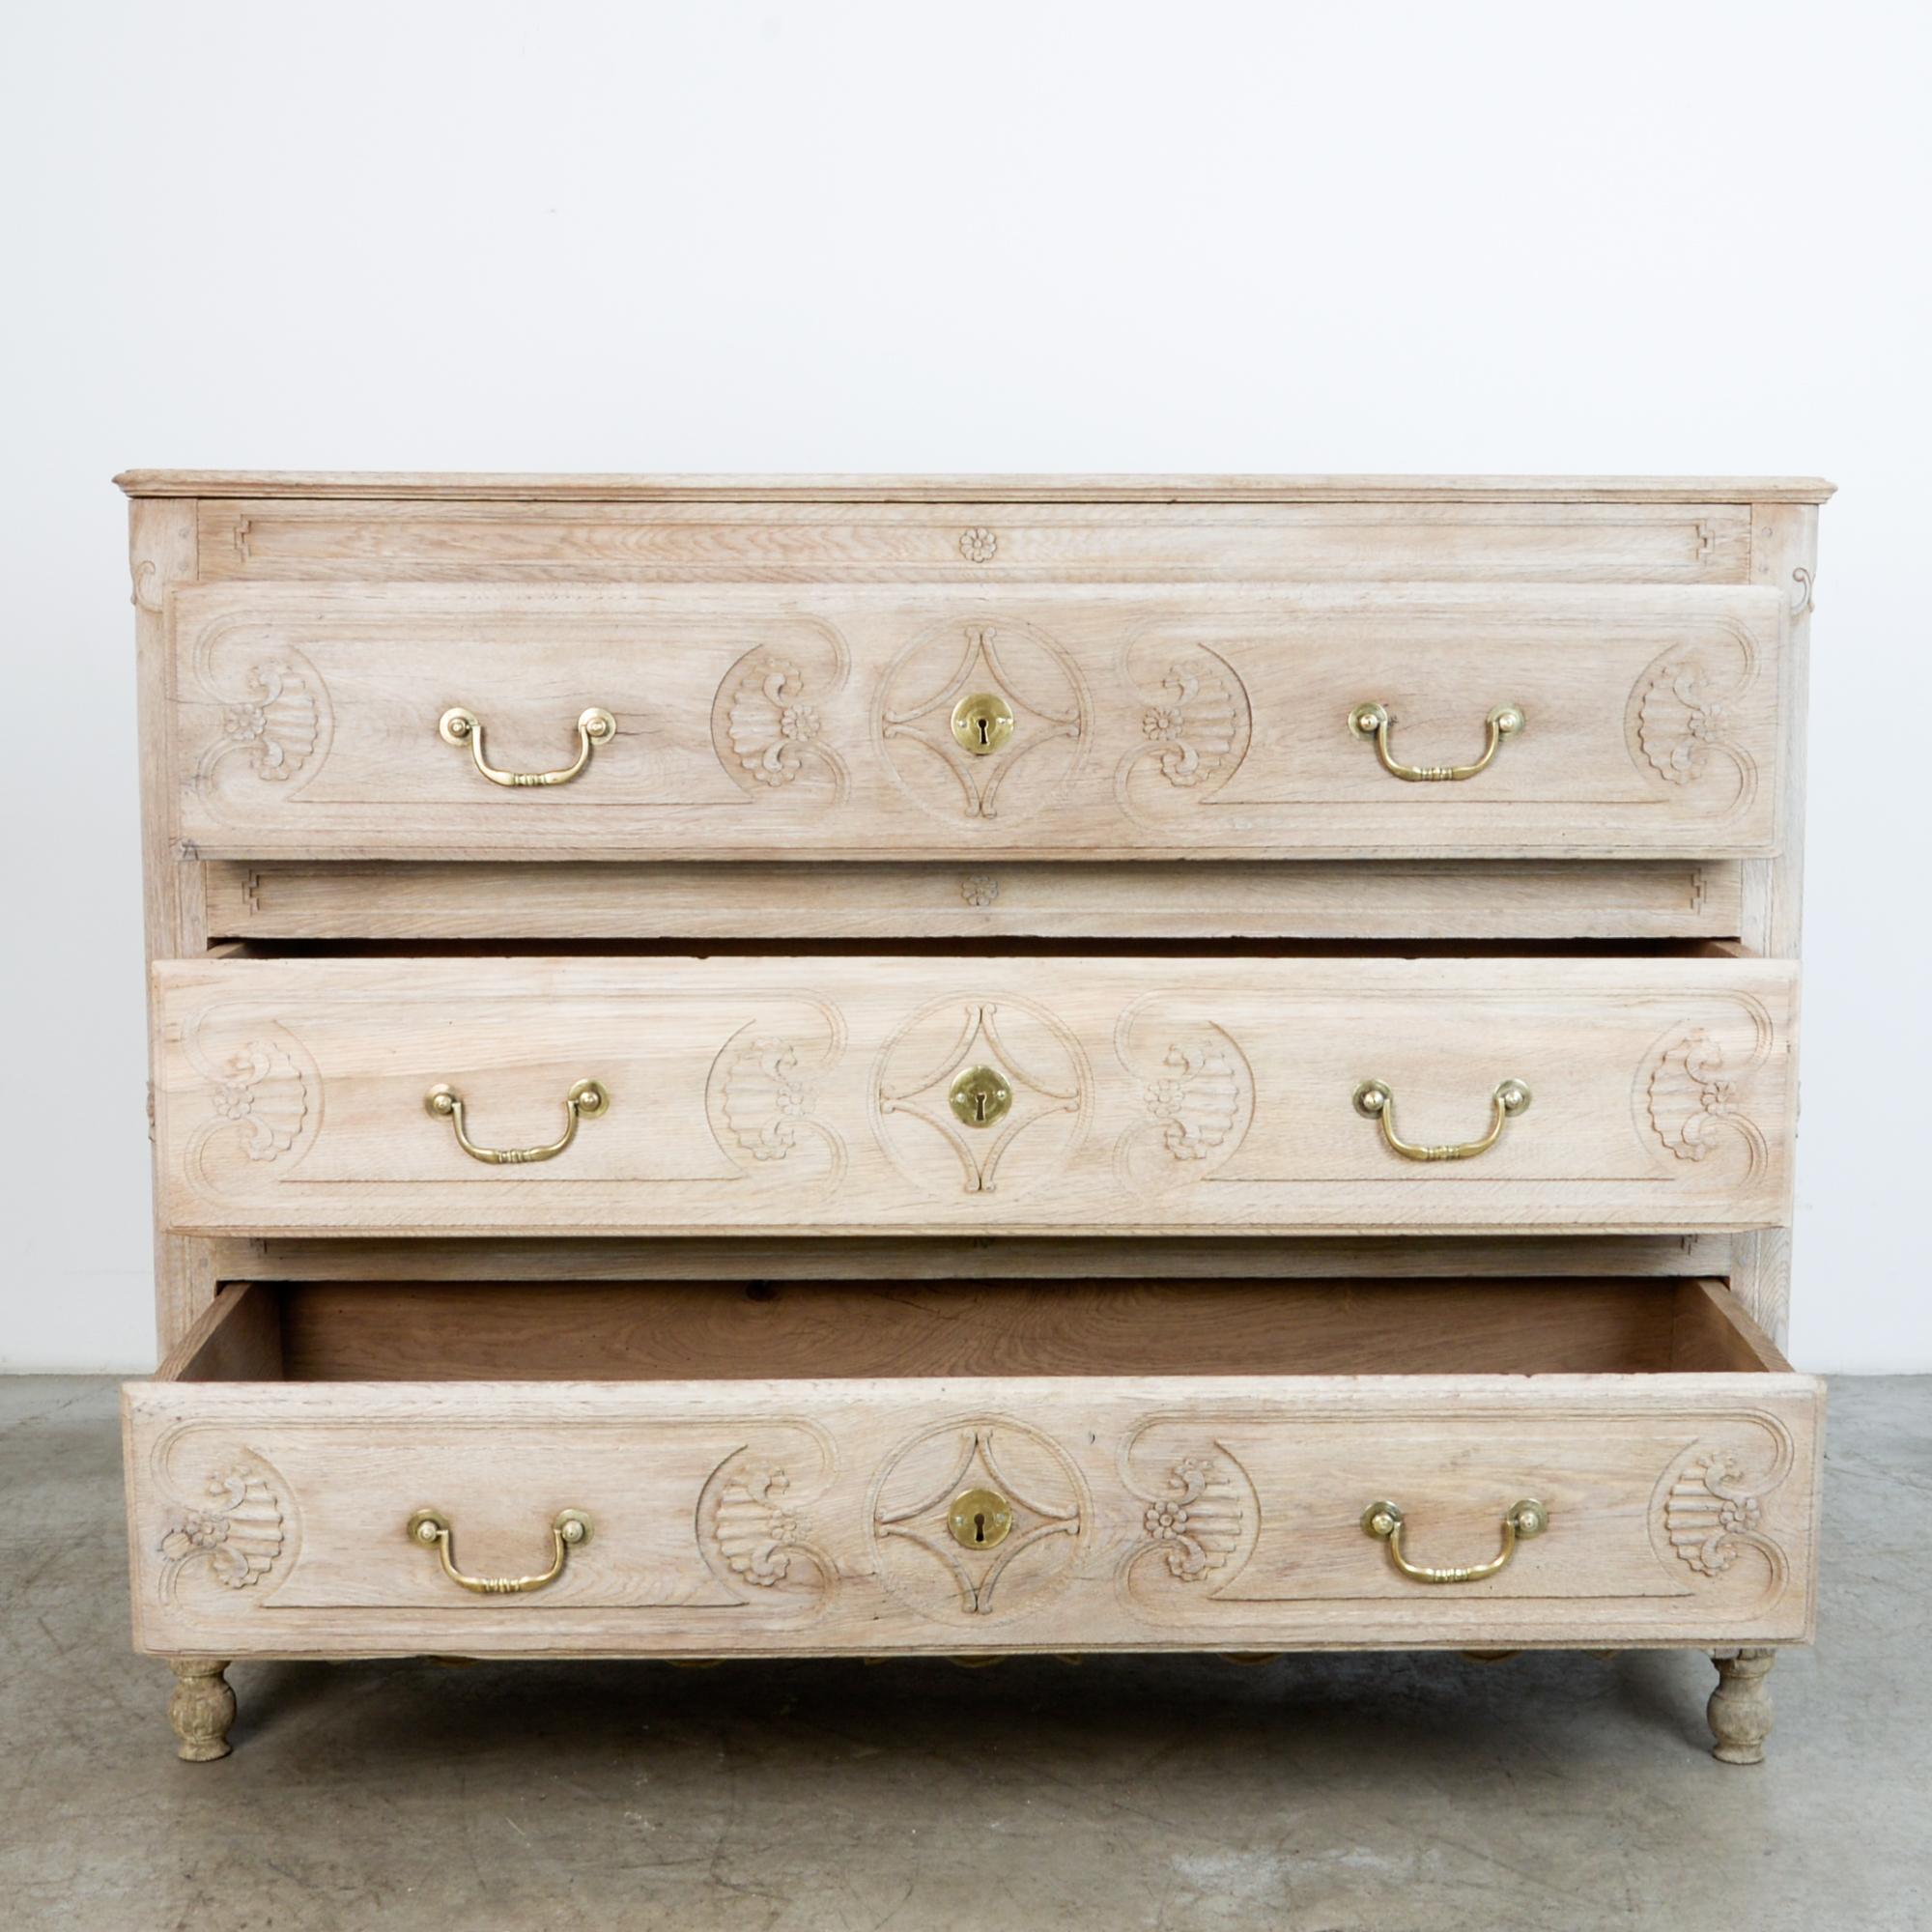 French Provincial 19th Century French Chest of Drawers